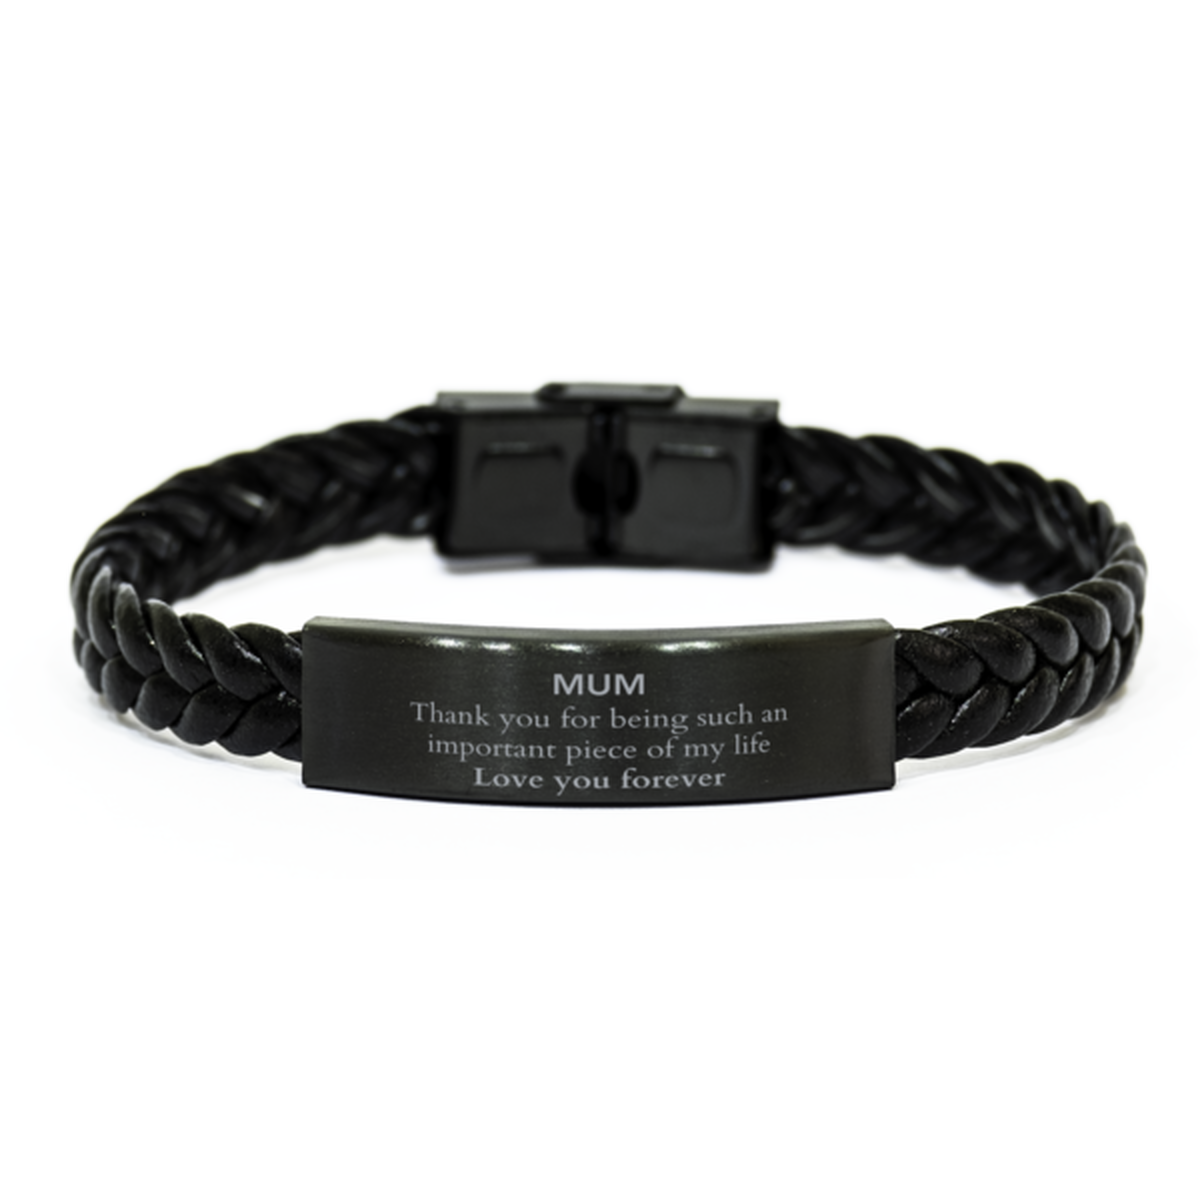 Appropriate Mum Braided Leather Bracelet Epic Birthday Gifts for Mum Thank you for being such an important piece of my life Mum Christmas Mothers Fathers Day